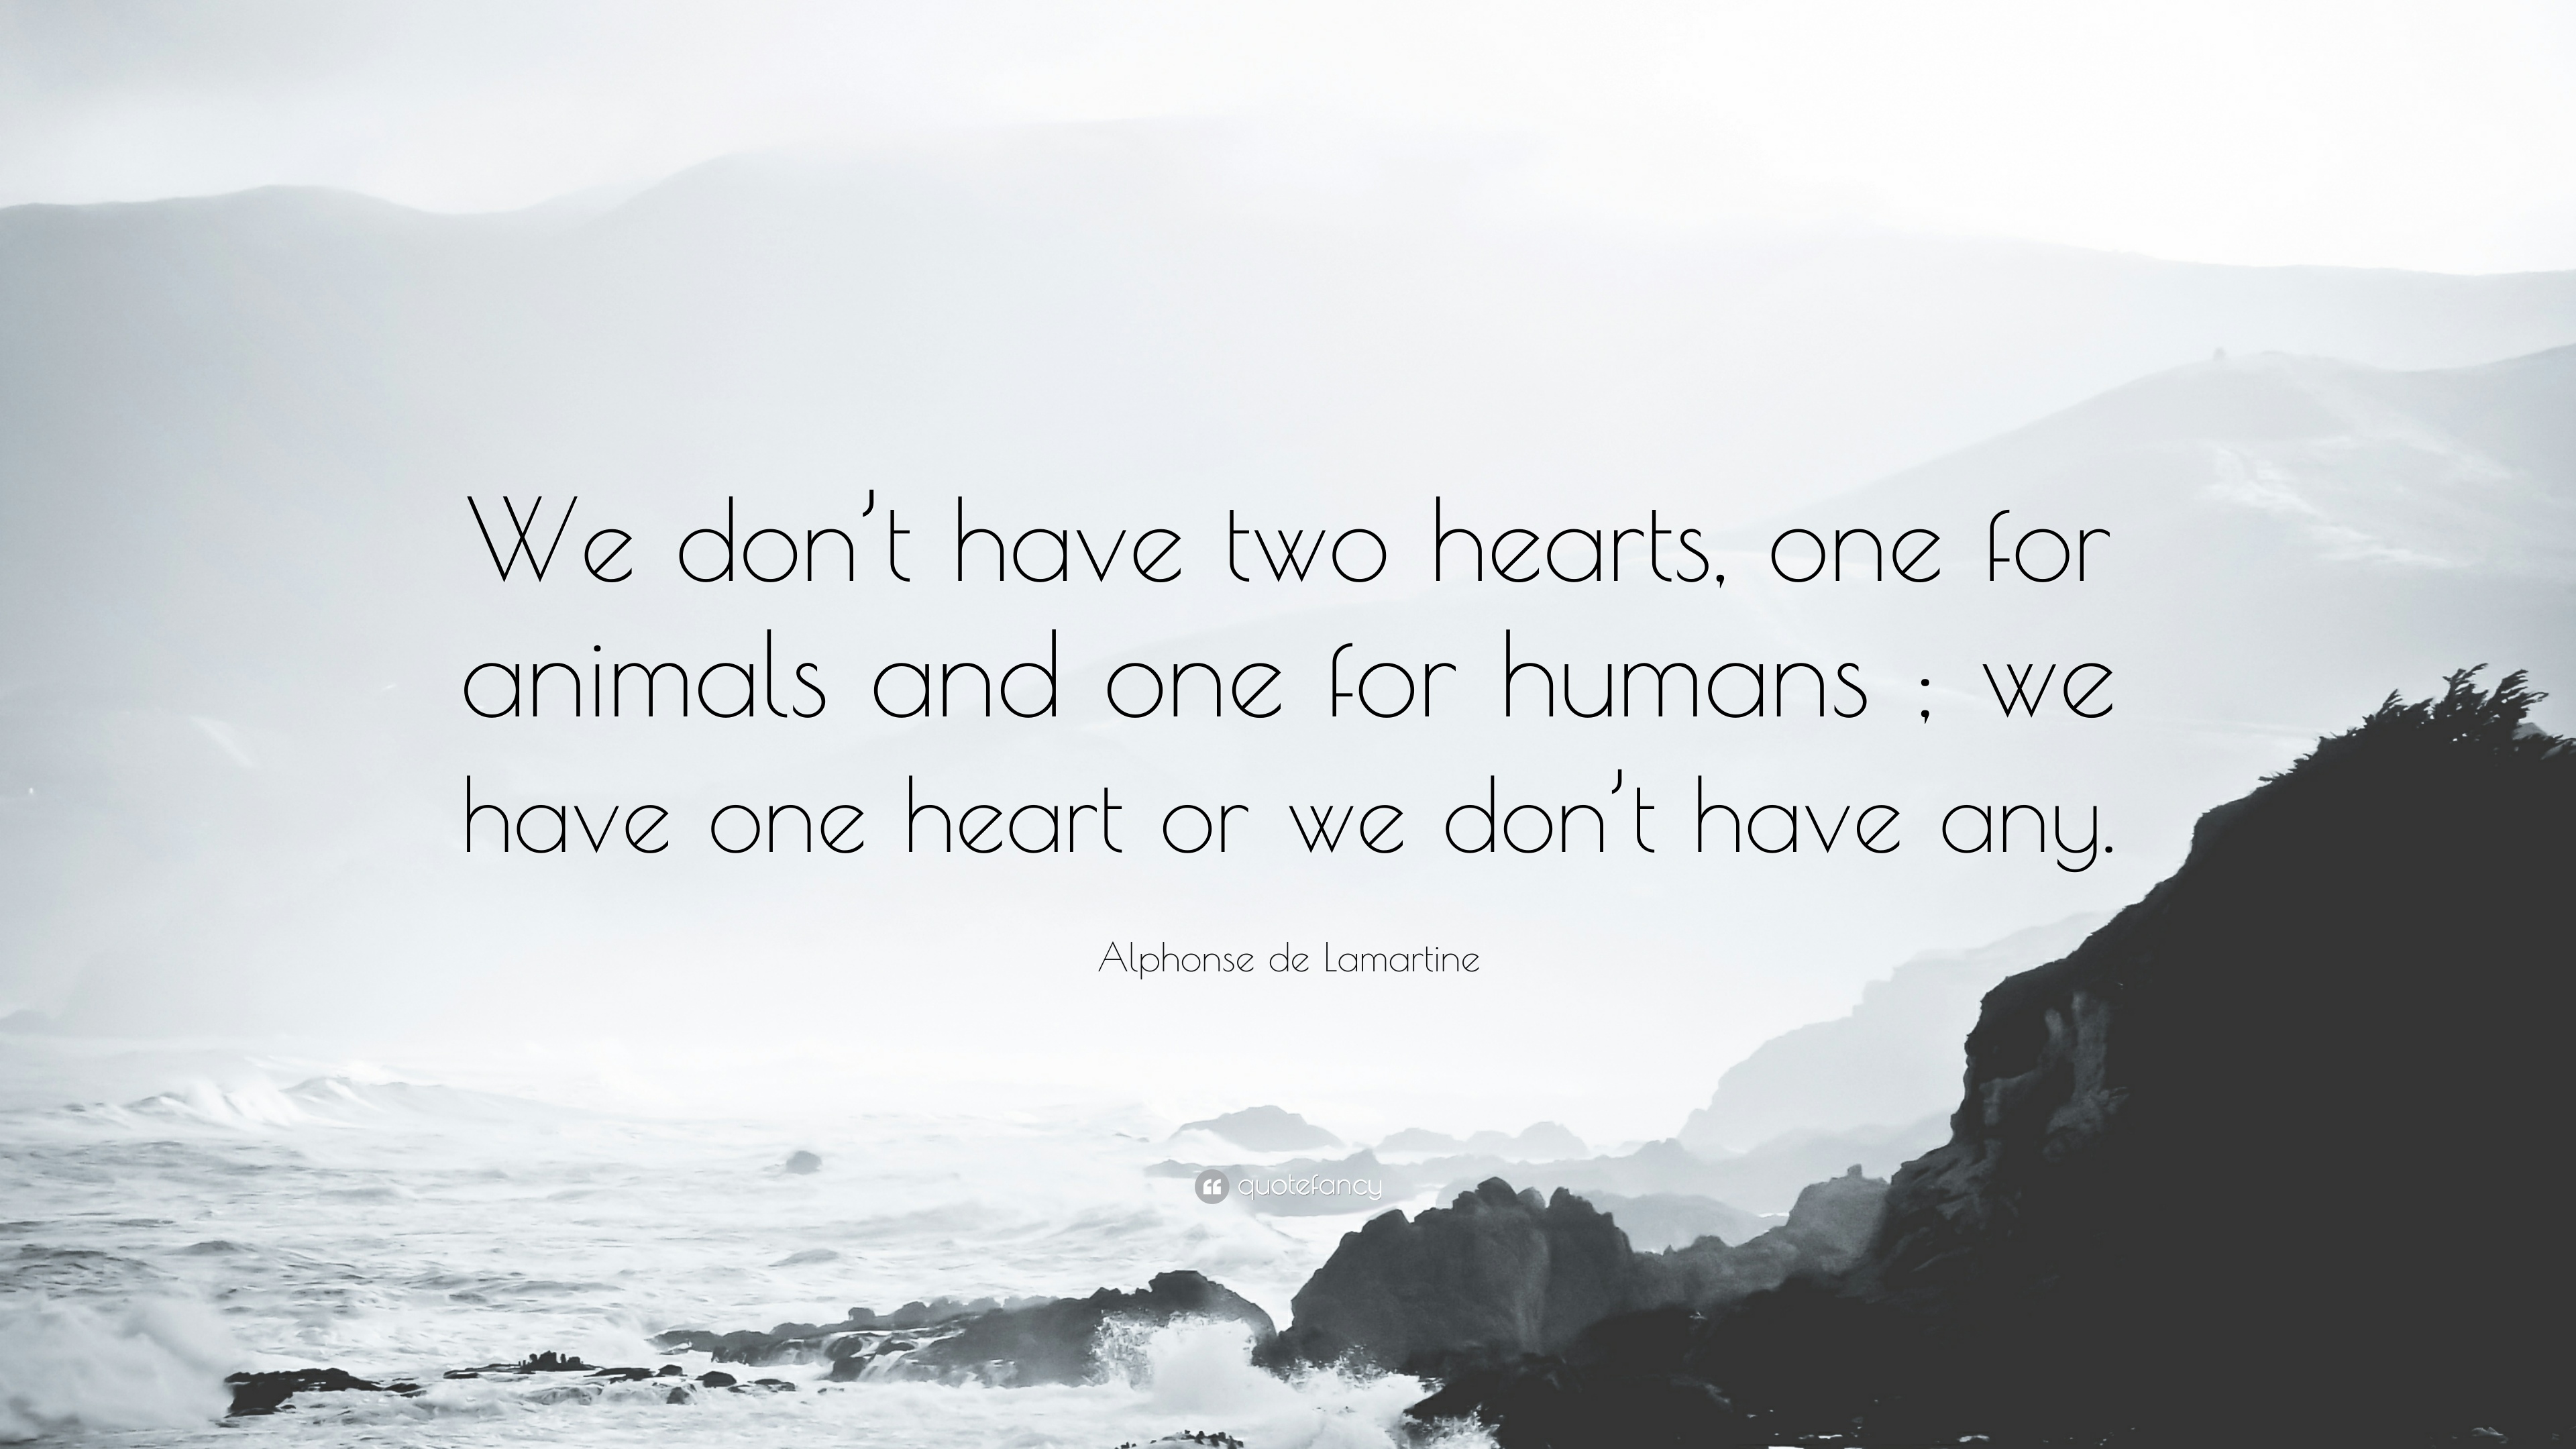 Alphonse de Lamartine Quote: “We don't have two hearts, one